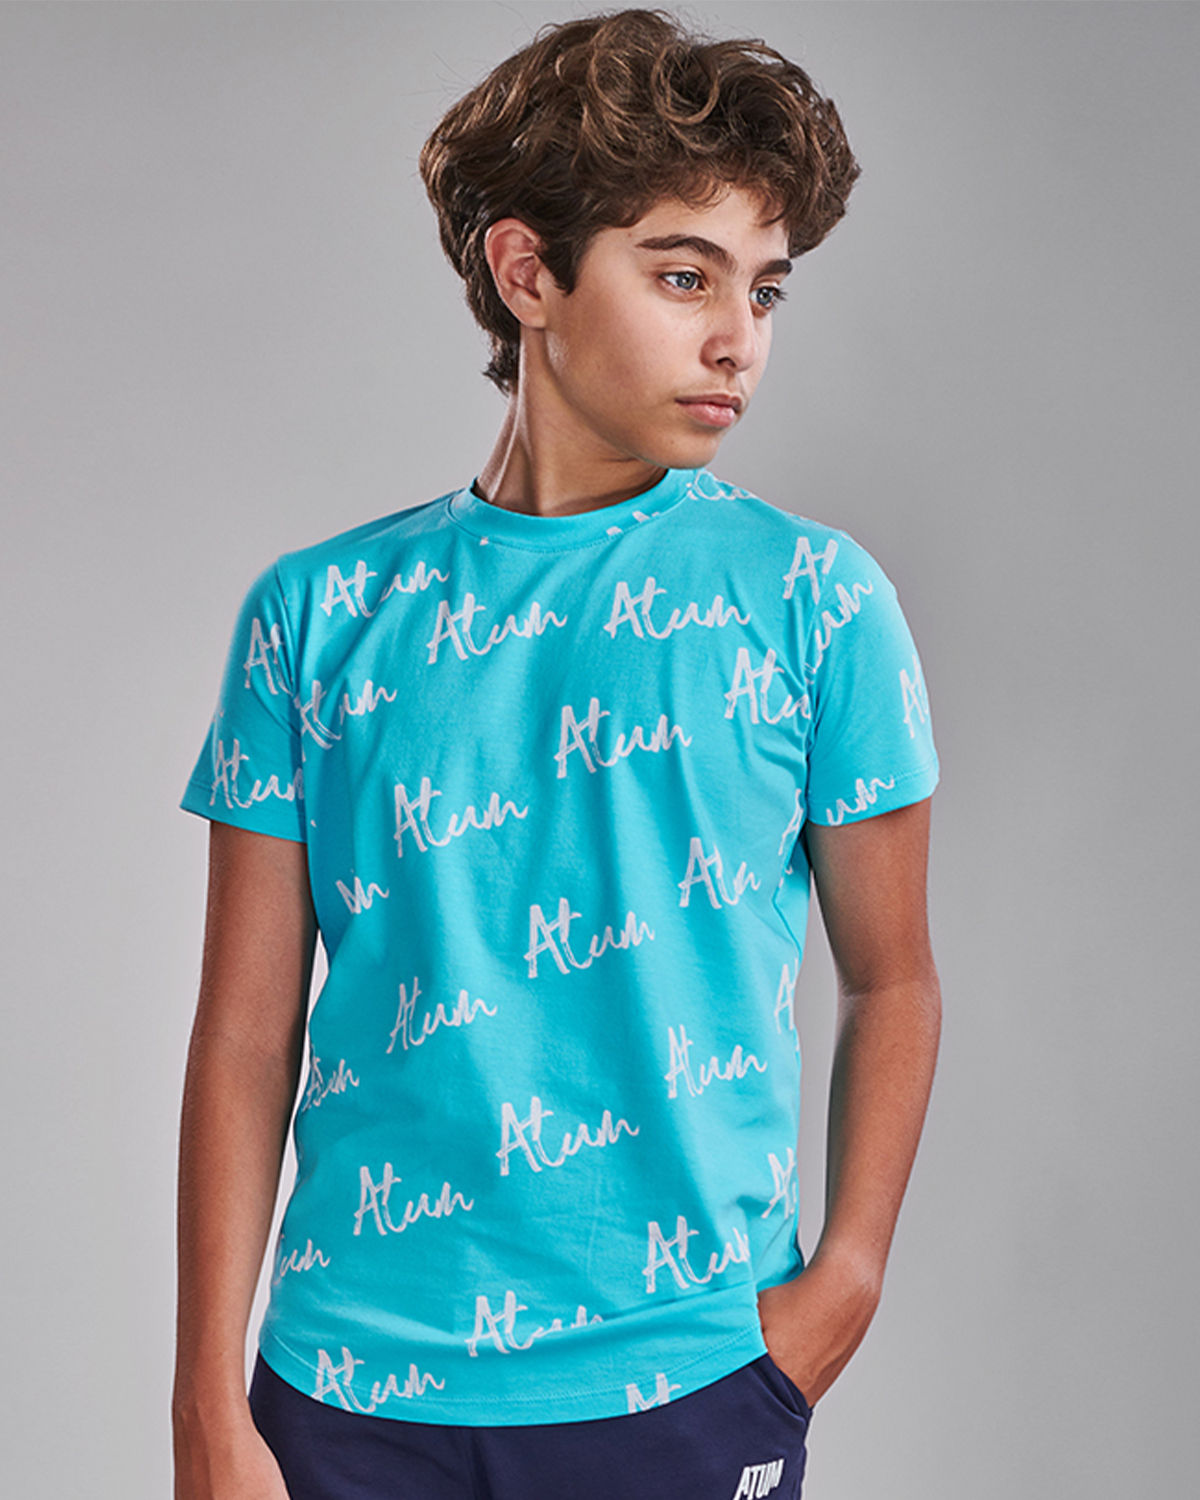 Photo by 𝗔𝗧𝗨𝗠 SPORTSWEAR ® on May 22, 2022. May be an image of 1 boy wears a blue printed t-shirt.